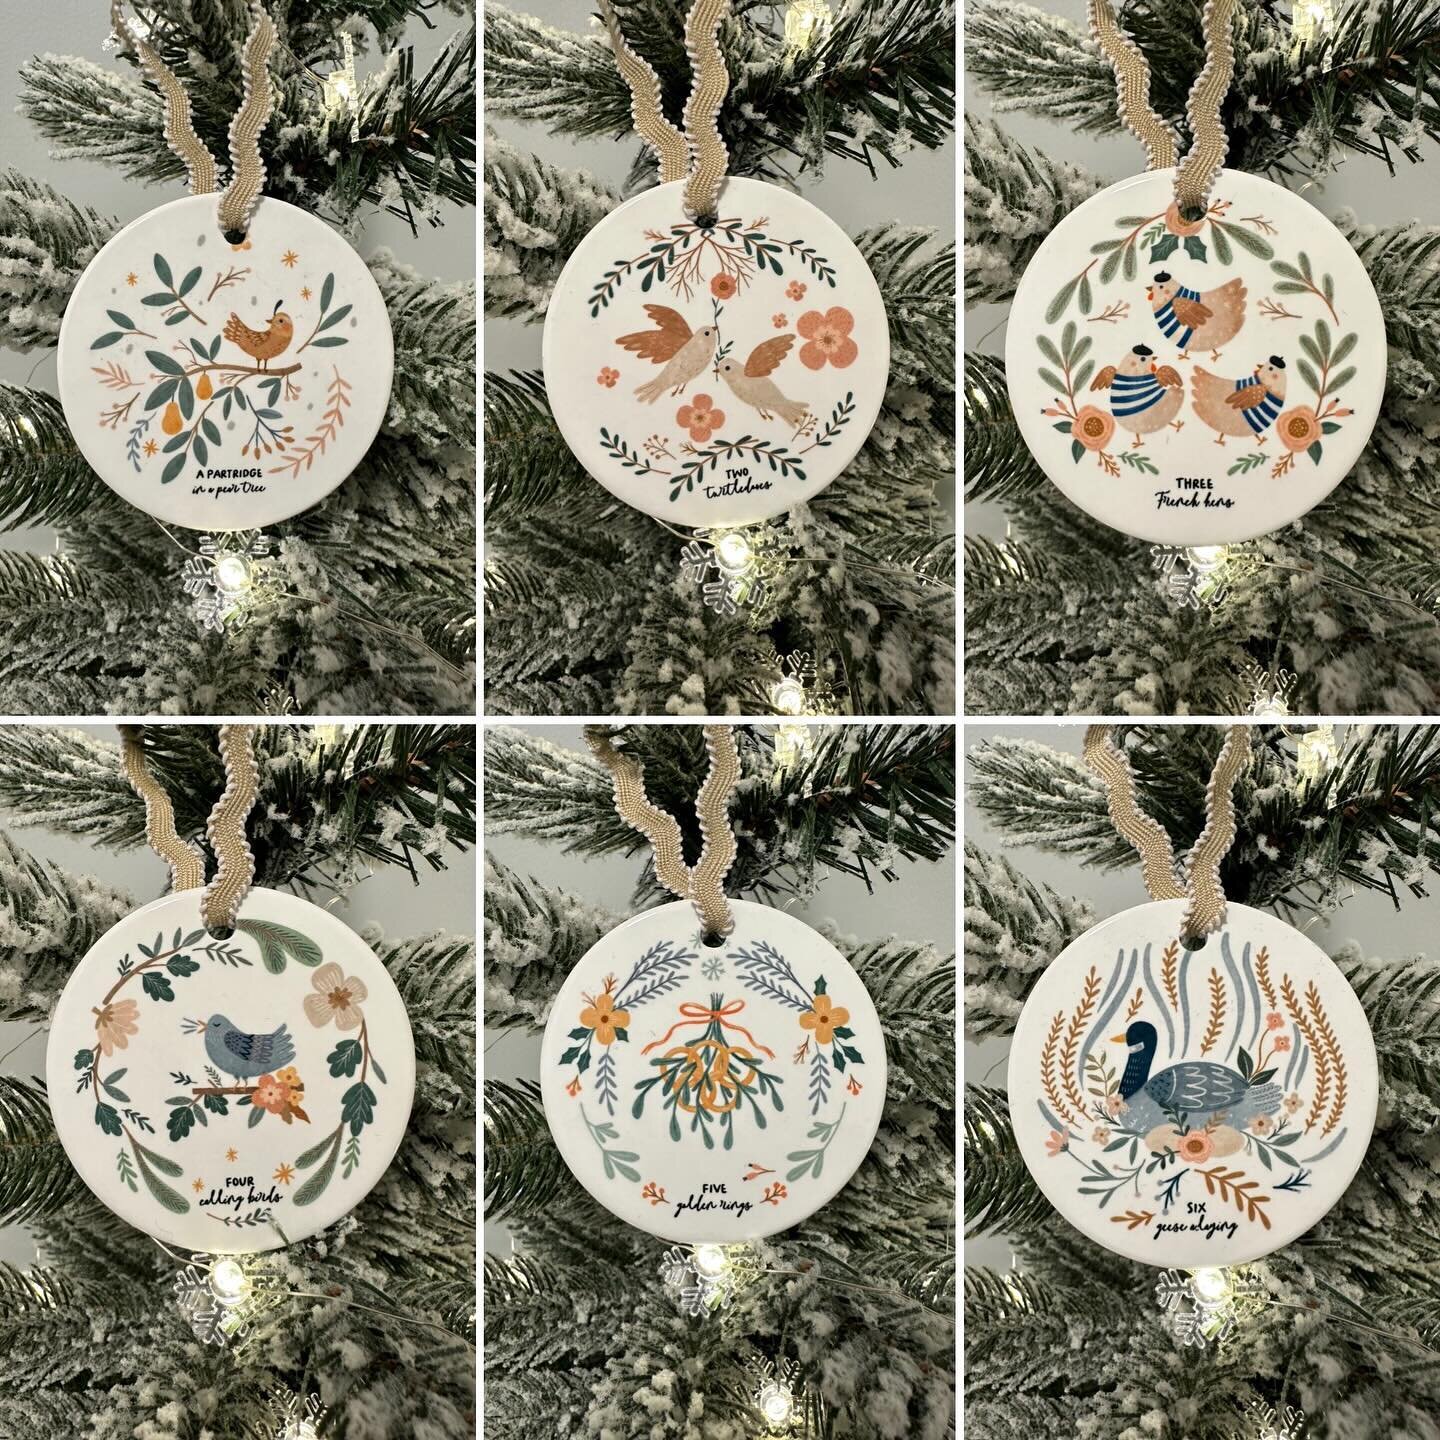 On the first day of Christmas my true love gave to me&hellip;&hellip;&hellip;. A set of 12 ceramic ornaments for my family Christmas tree! 🎄 DM me to order yours today!